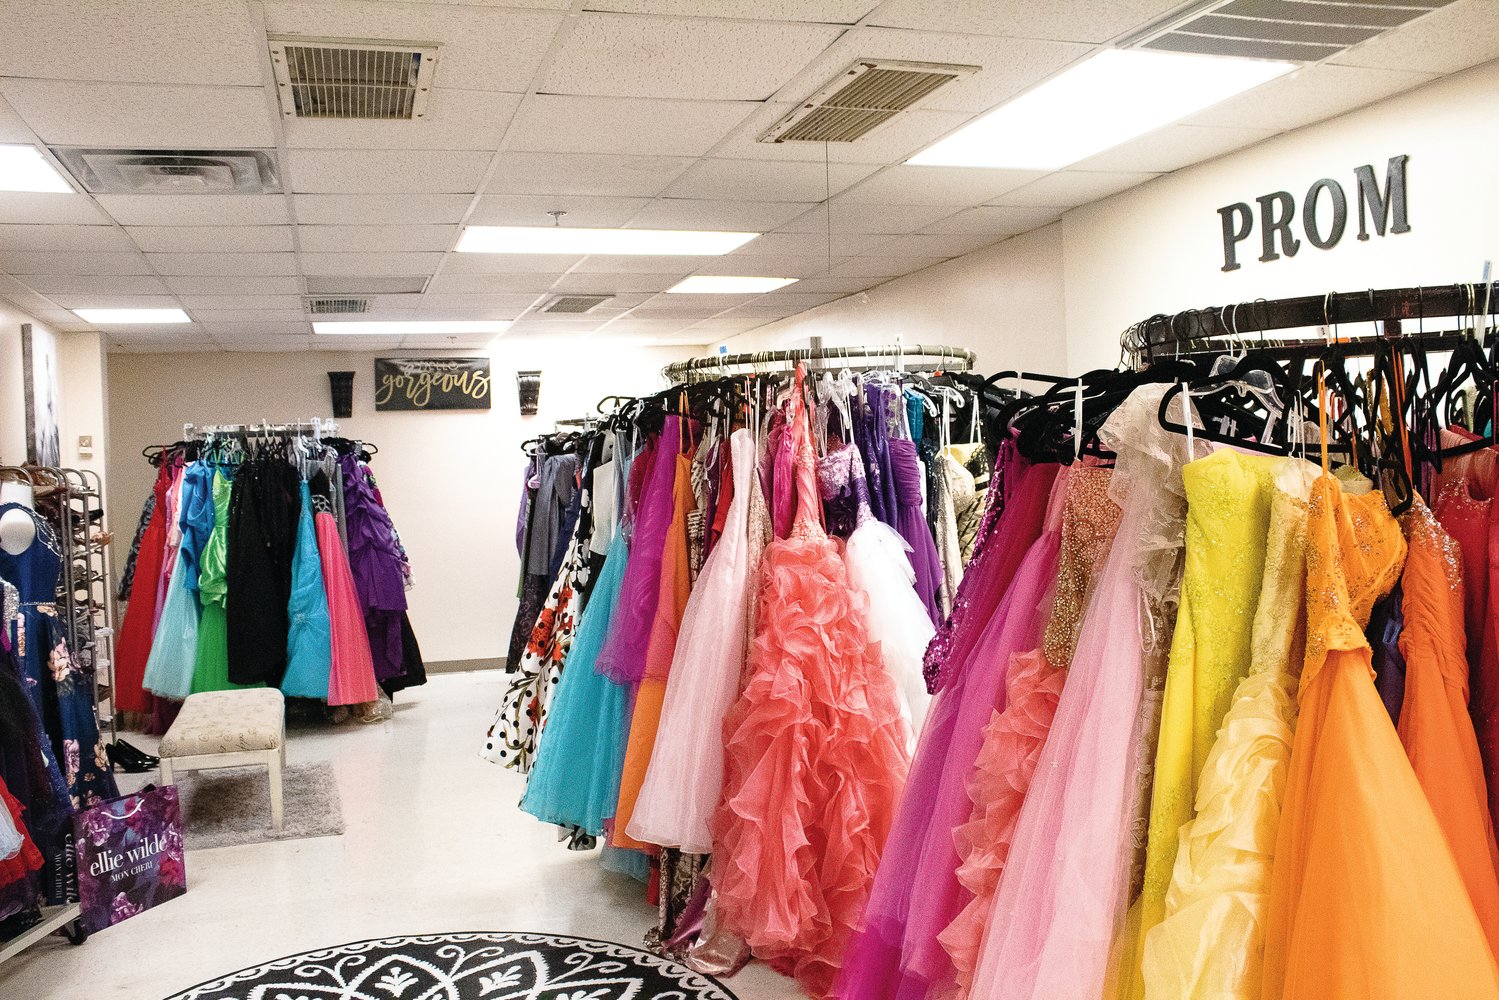 Among its offerings, Endless Apparel loans out prom dresses to those in need.